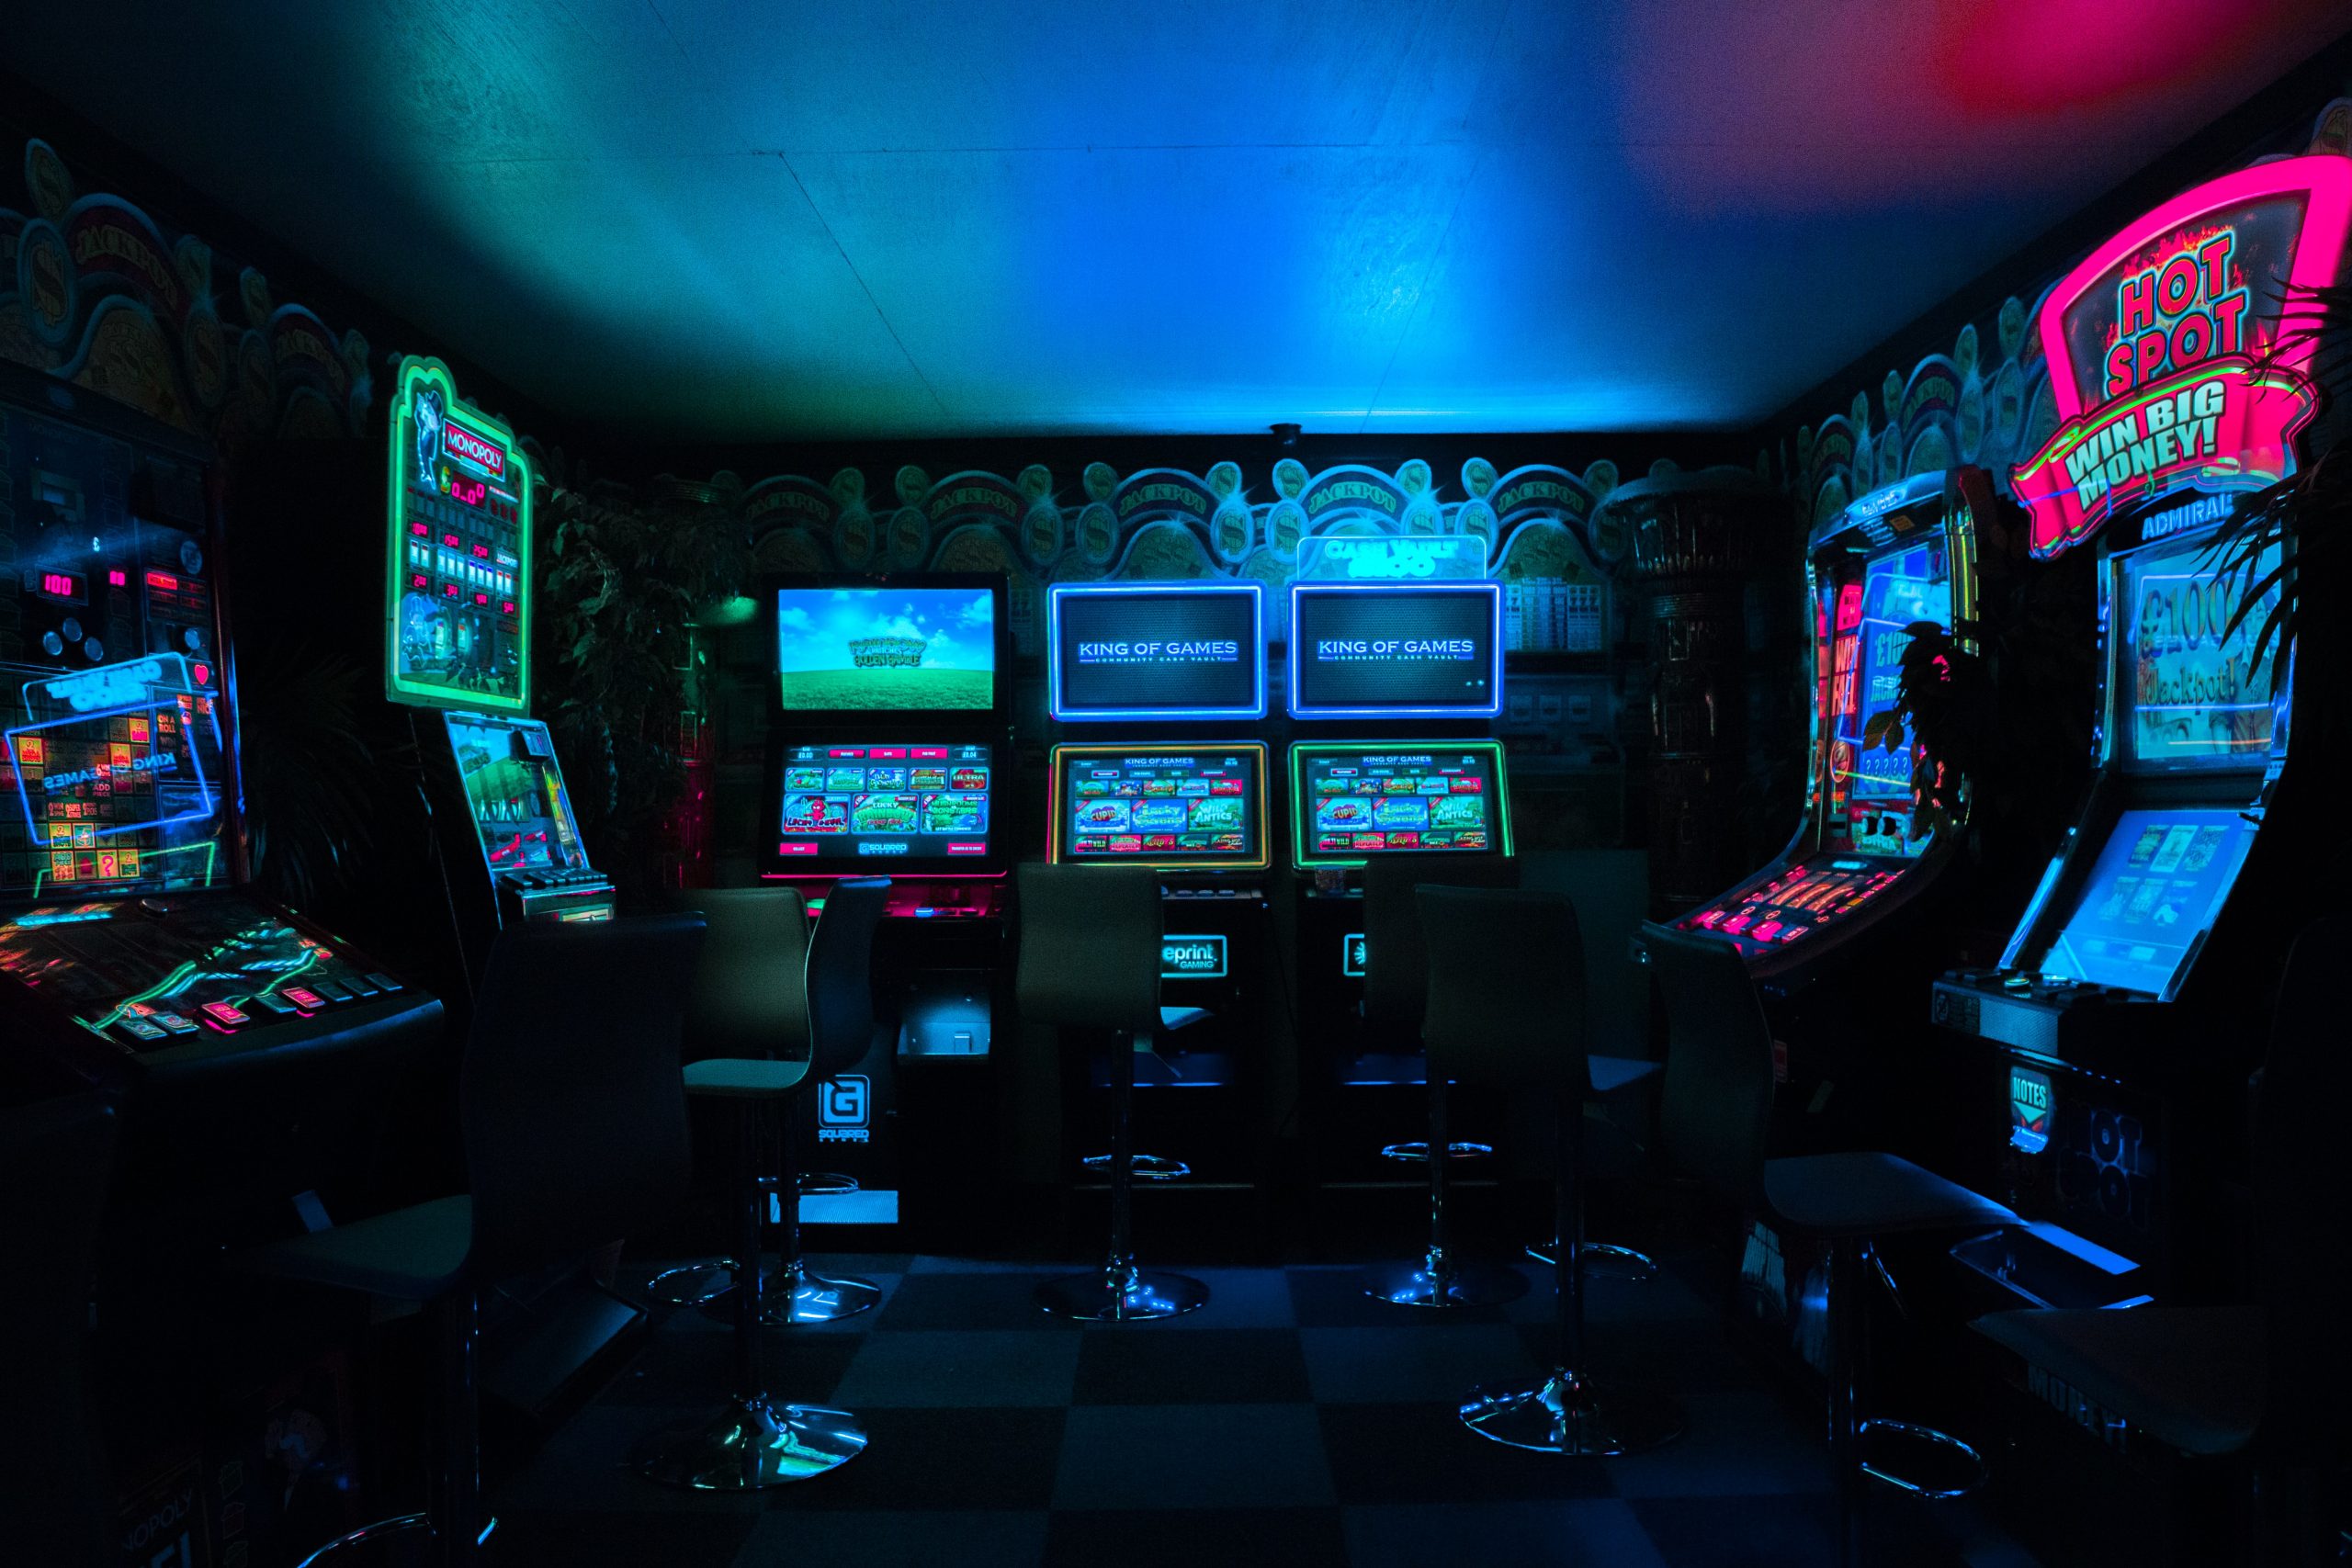 Game machines in a room